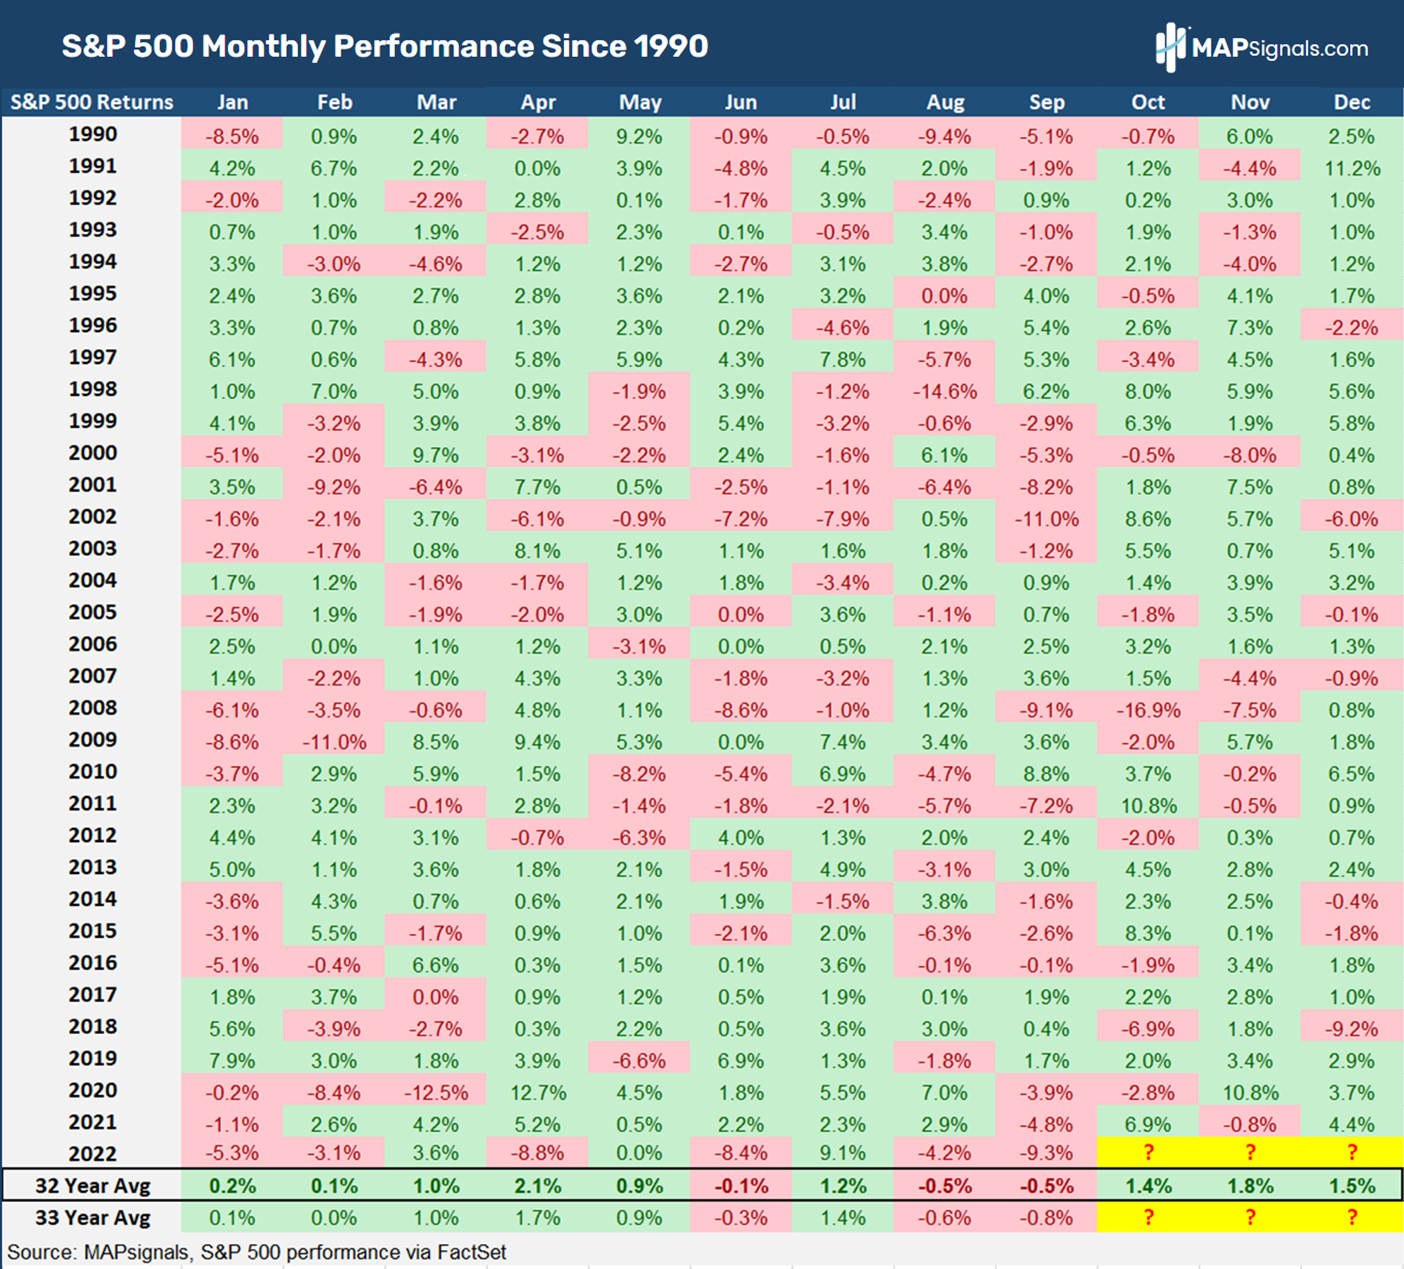 S&P 500 monthly performance since 1990 | MAPsignals